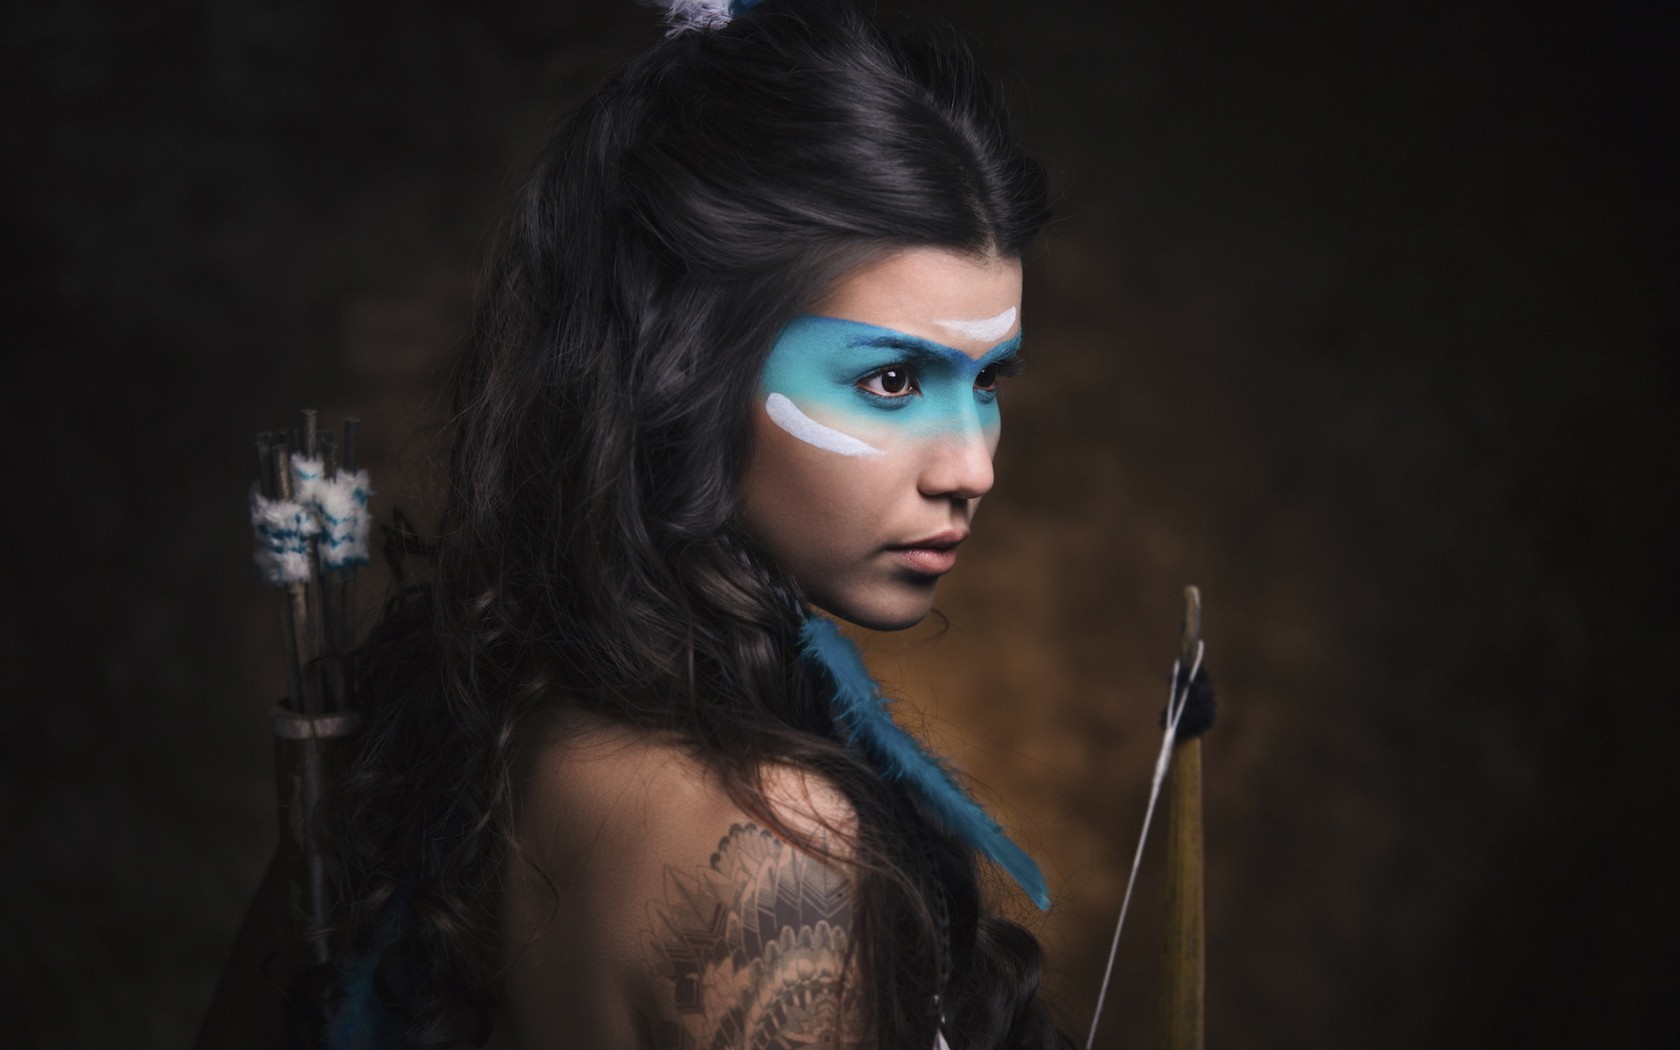 People 1680x1050 archer women face paint brunette tattoo long hair profile cosplay fantasy girl model bow and arrow portrait